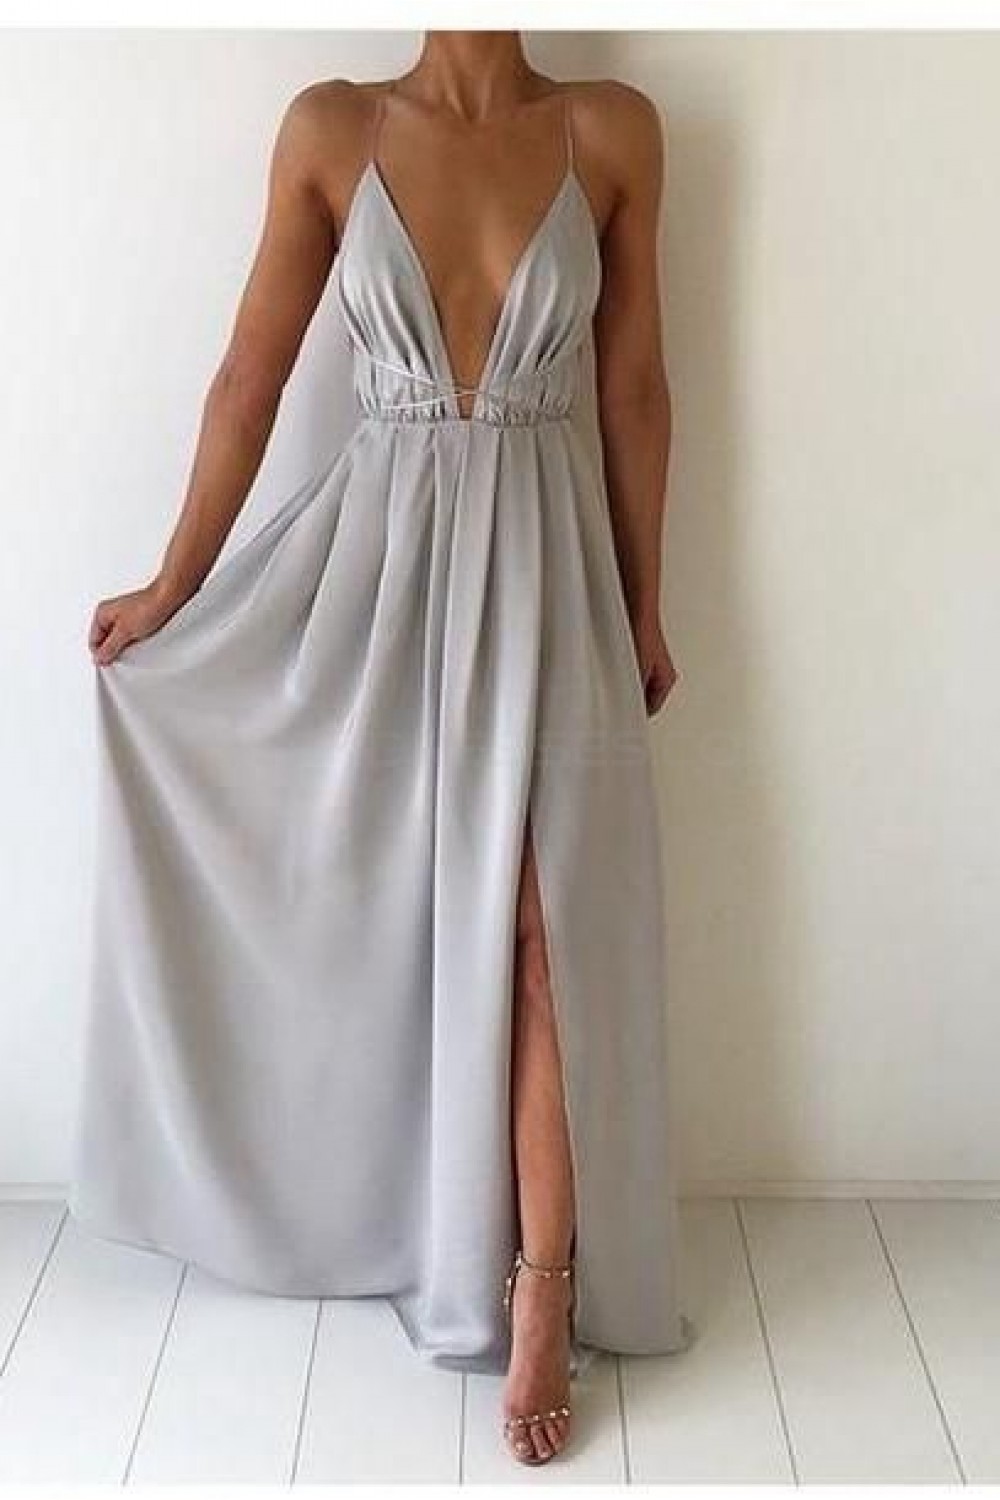 Deep V-Neck Spaghetti Straps Criss Cross Back Prom Formal Evening Party